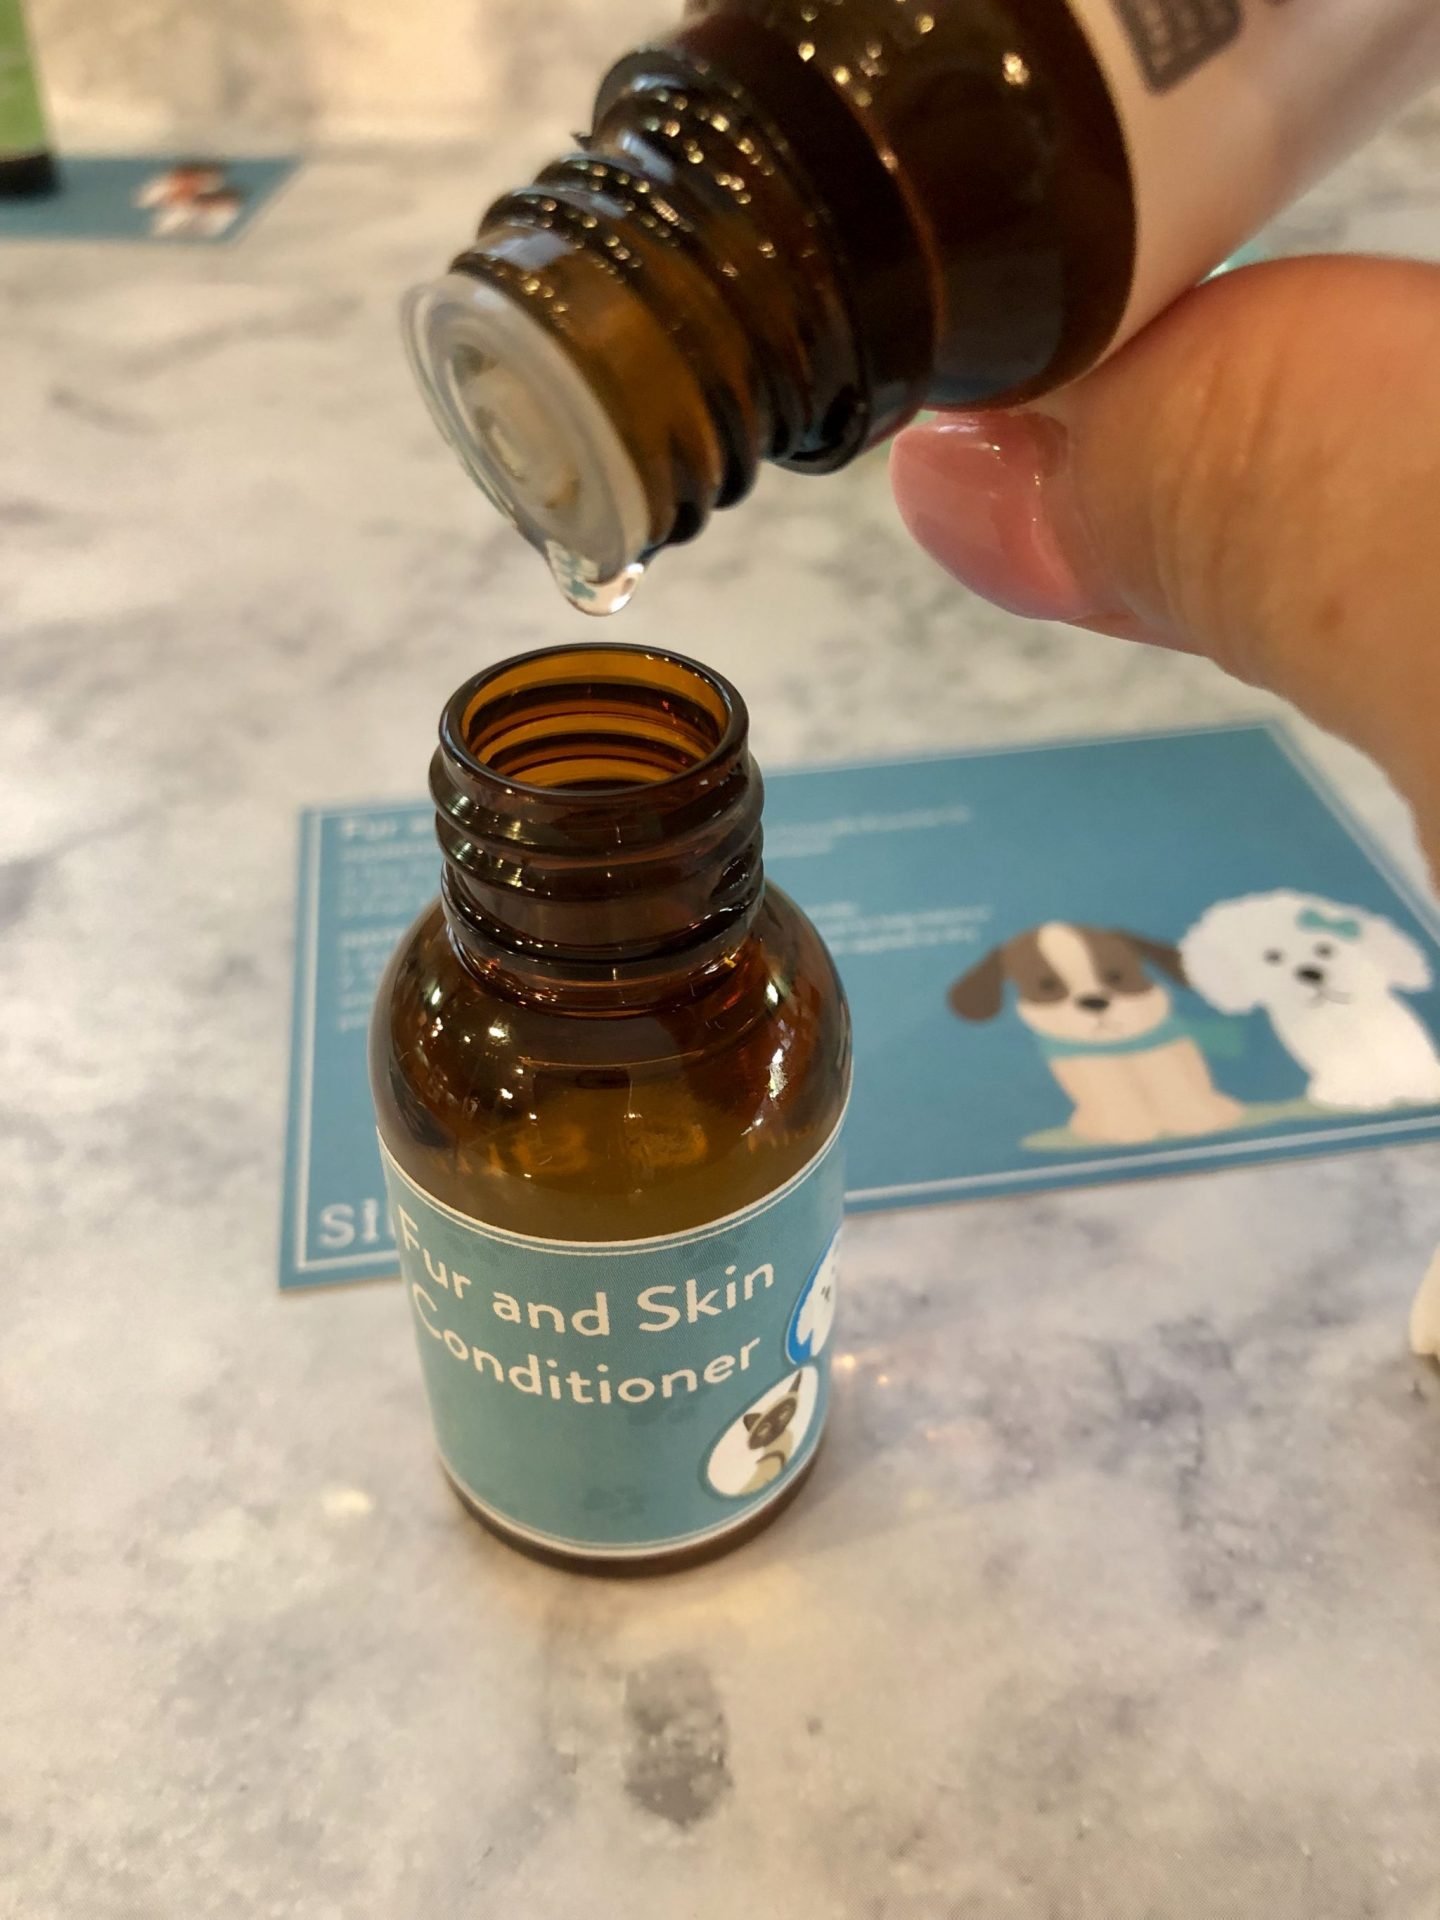 Essential Oils for dogs